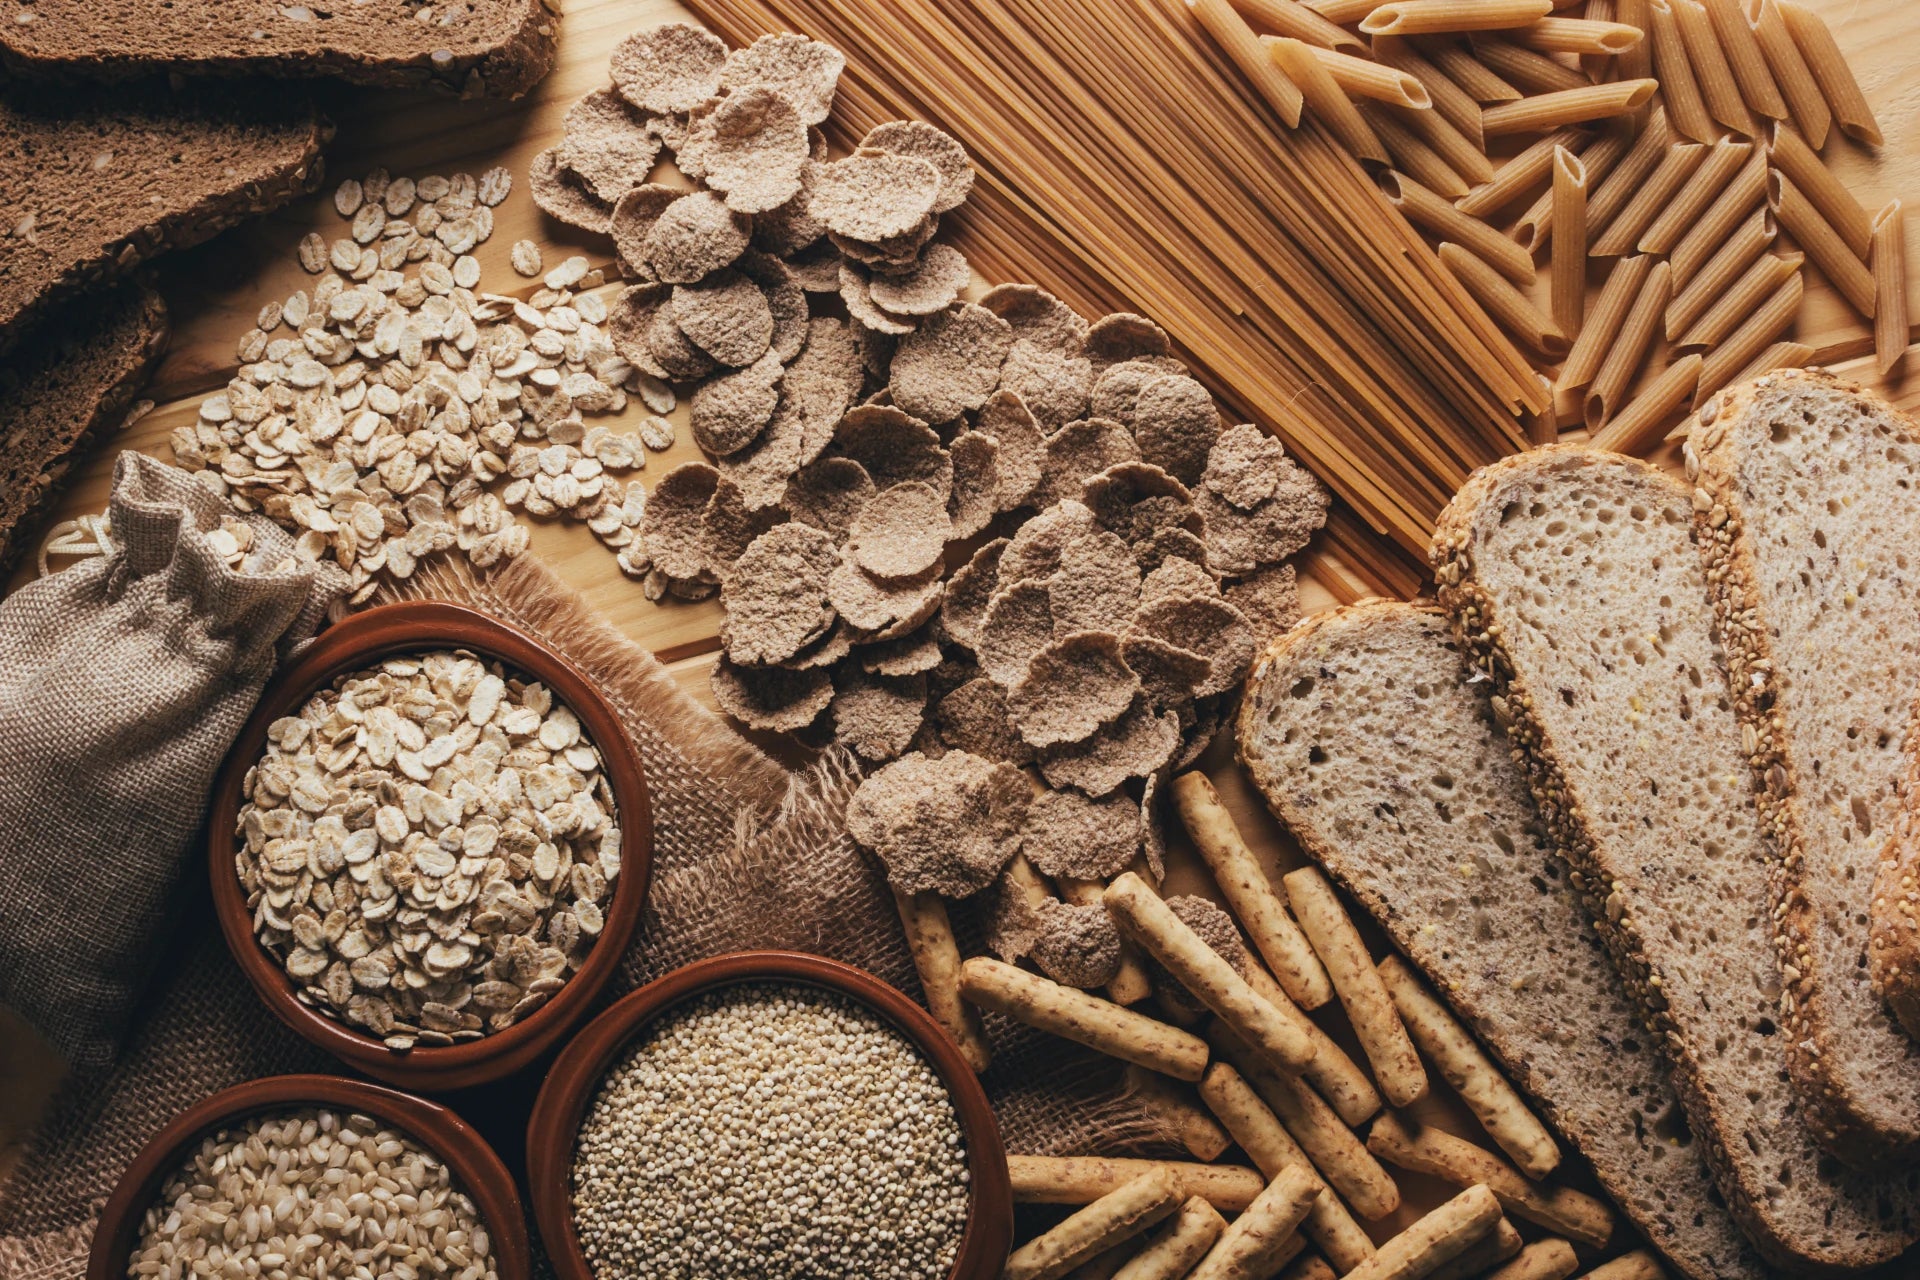 Whole Grain or Processed: Does it Really Make a Difference?